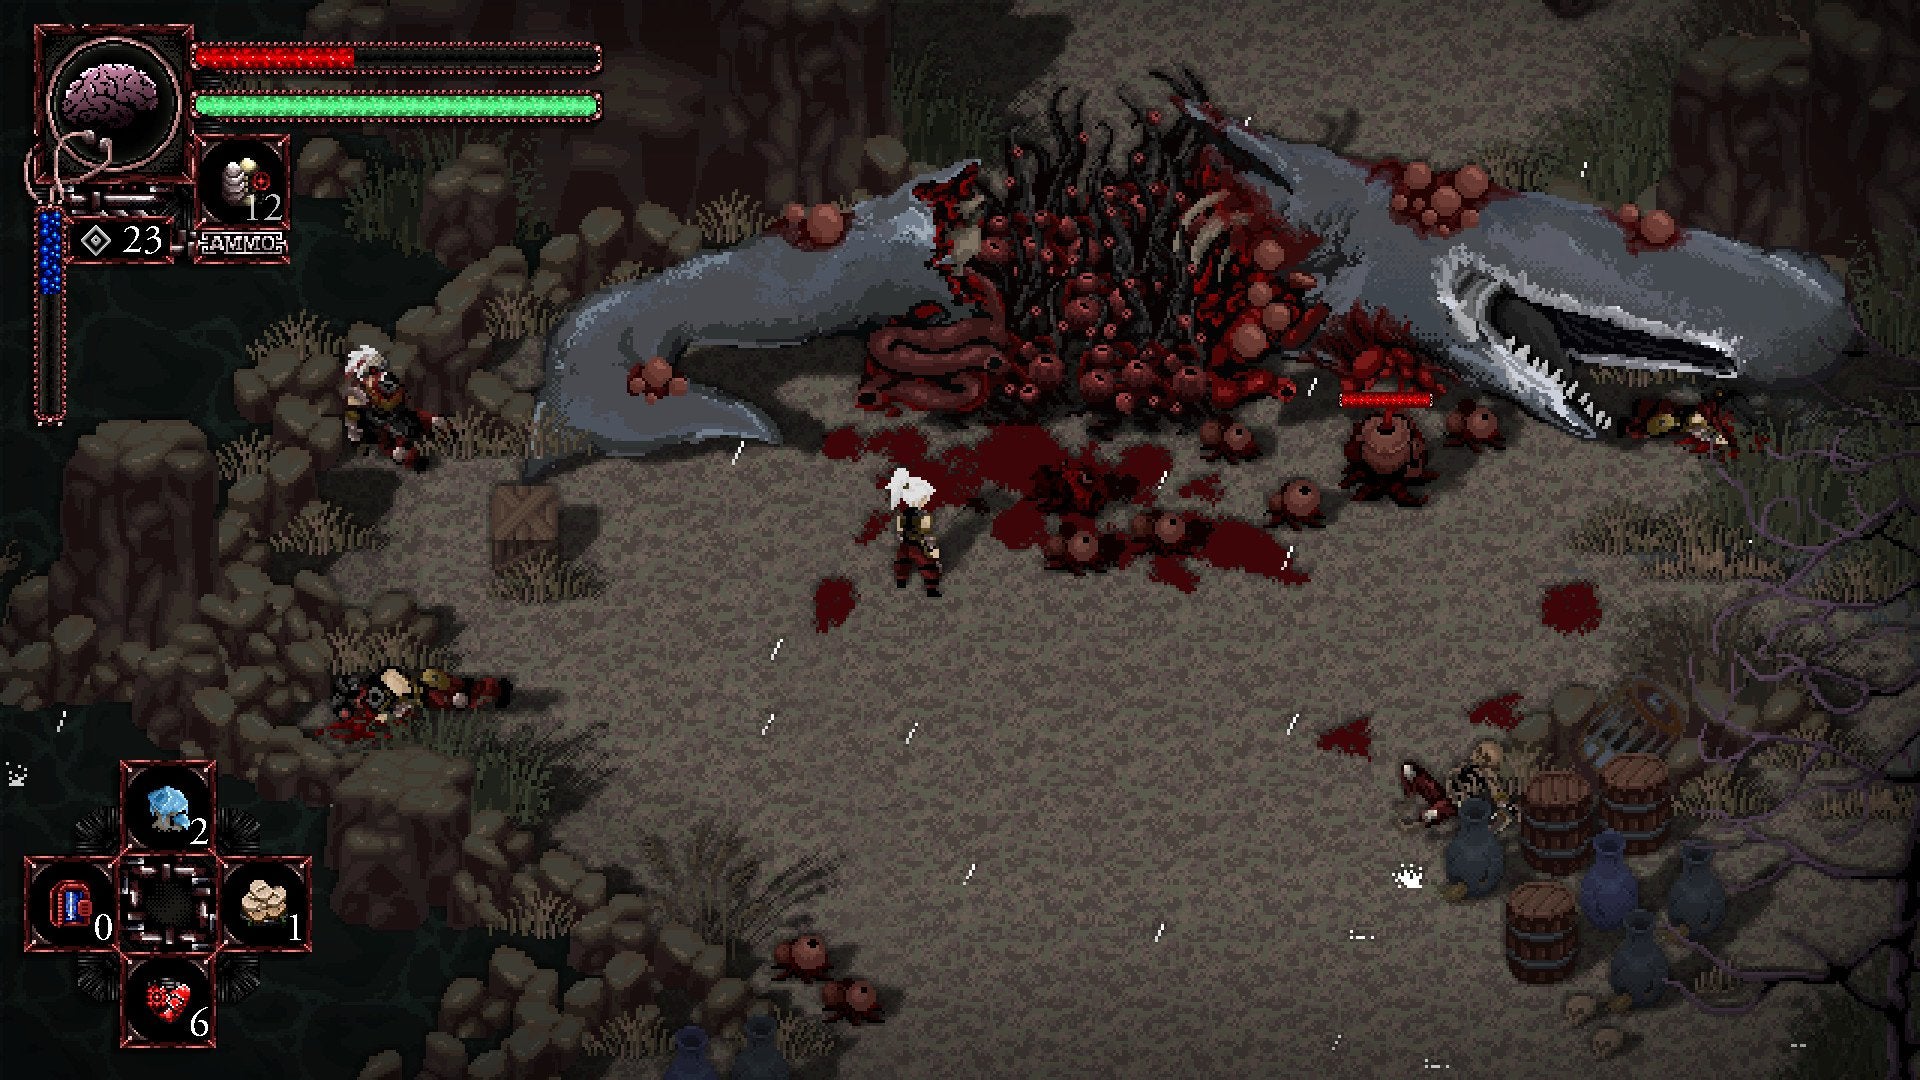 The player looking at the massacred body of a dead whale in Morbid: The Seven Acolytes—a Soulslike game.